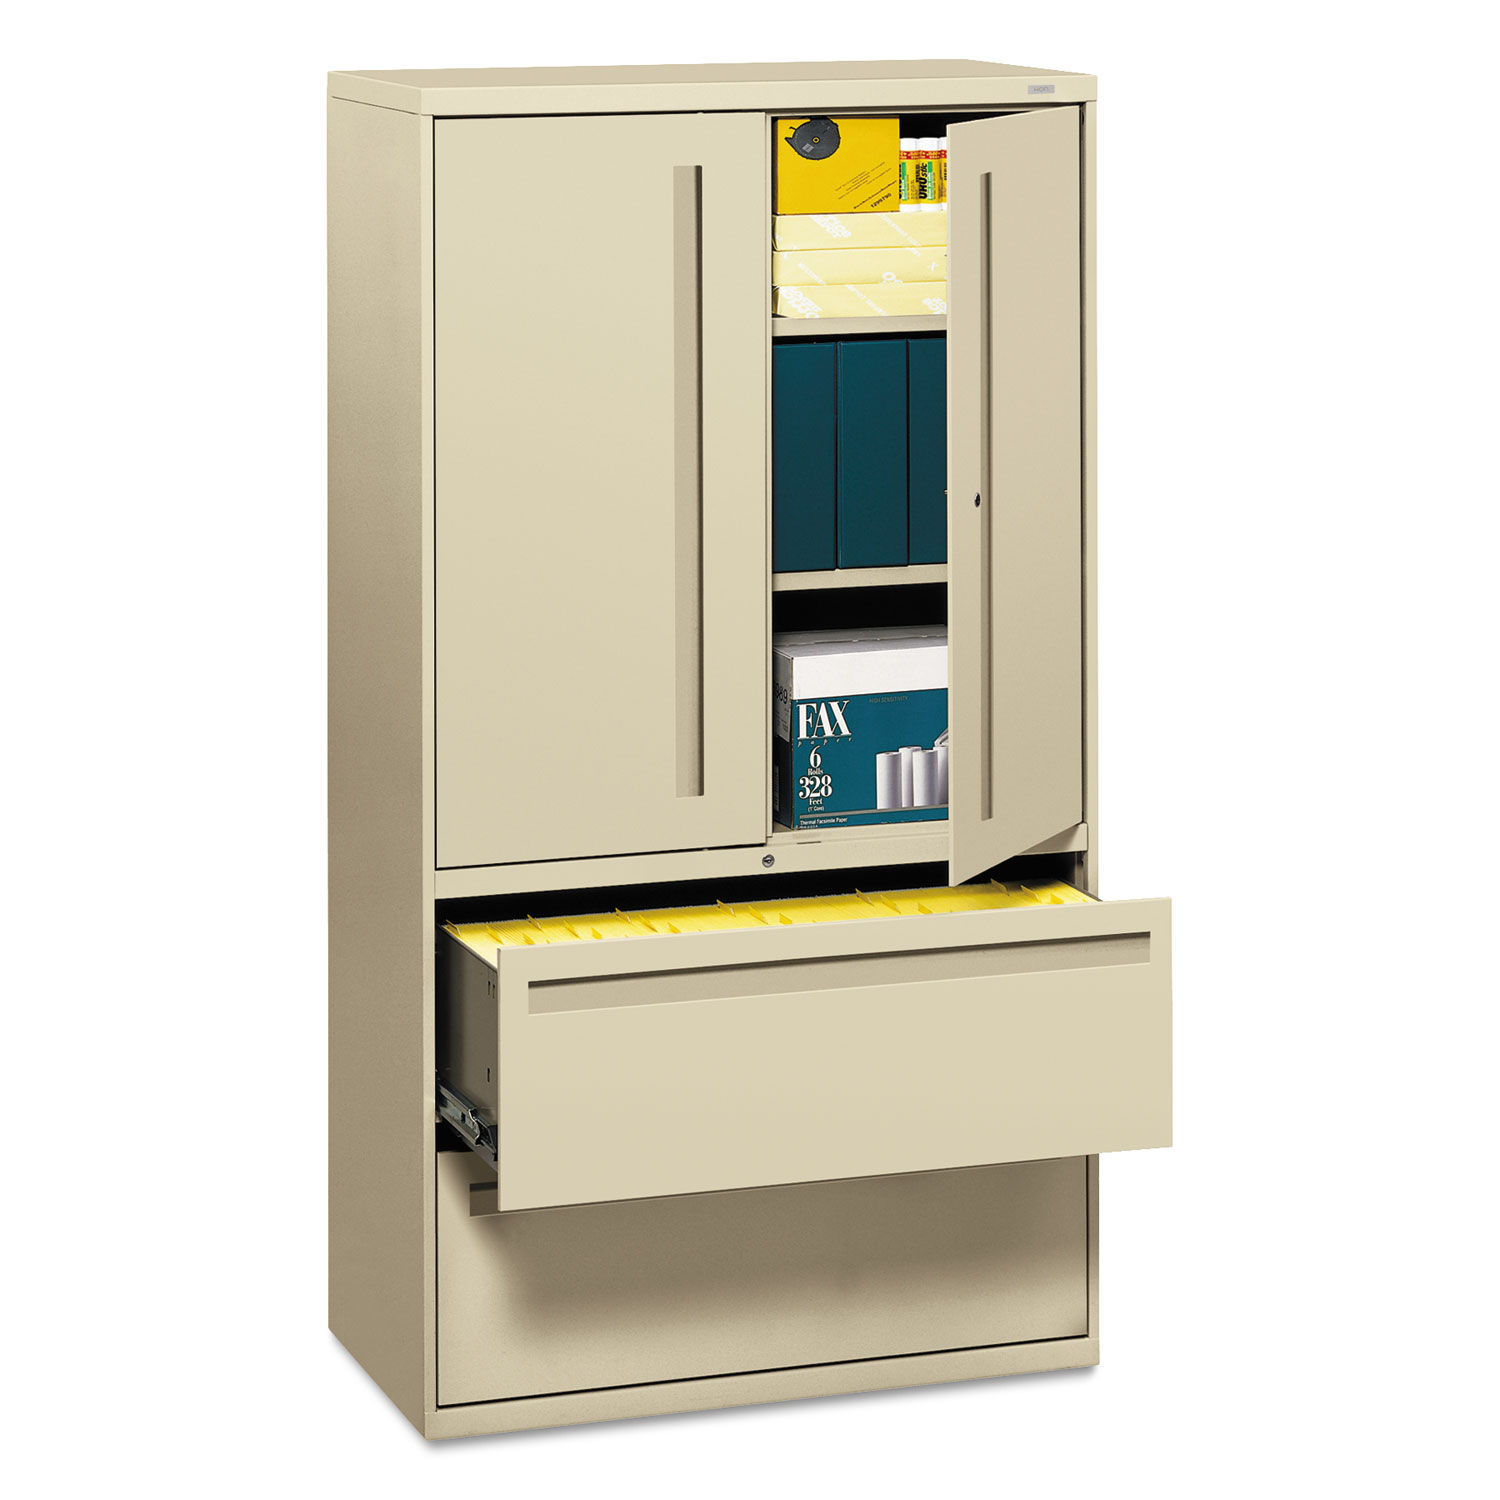  HON H785LS.L.L 700 Series Lateral File with Storage Cabinet, 36w x 18d x 64.25h, Putty (HON785LSL) 